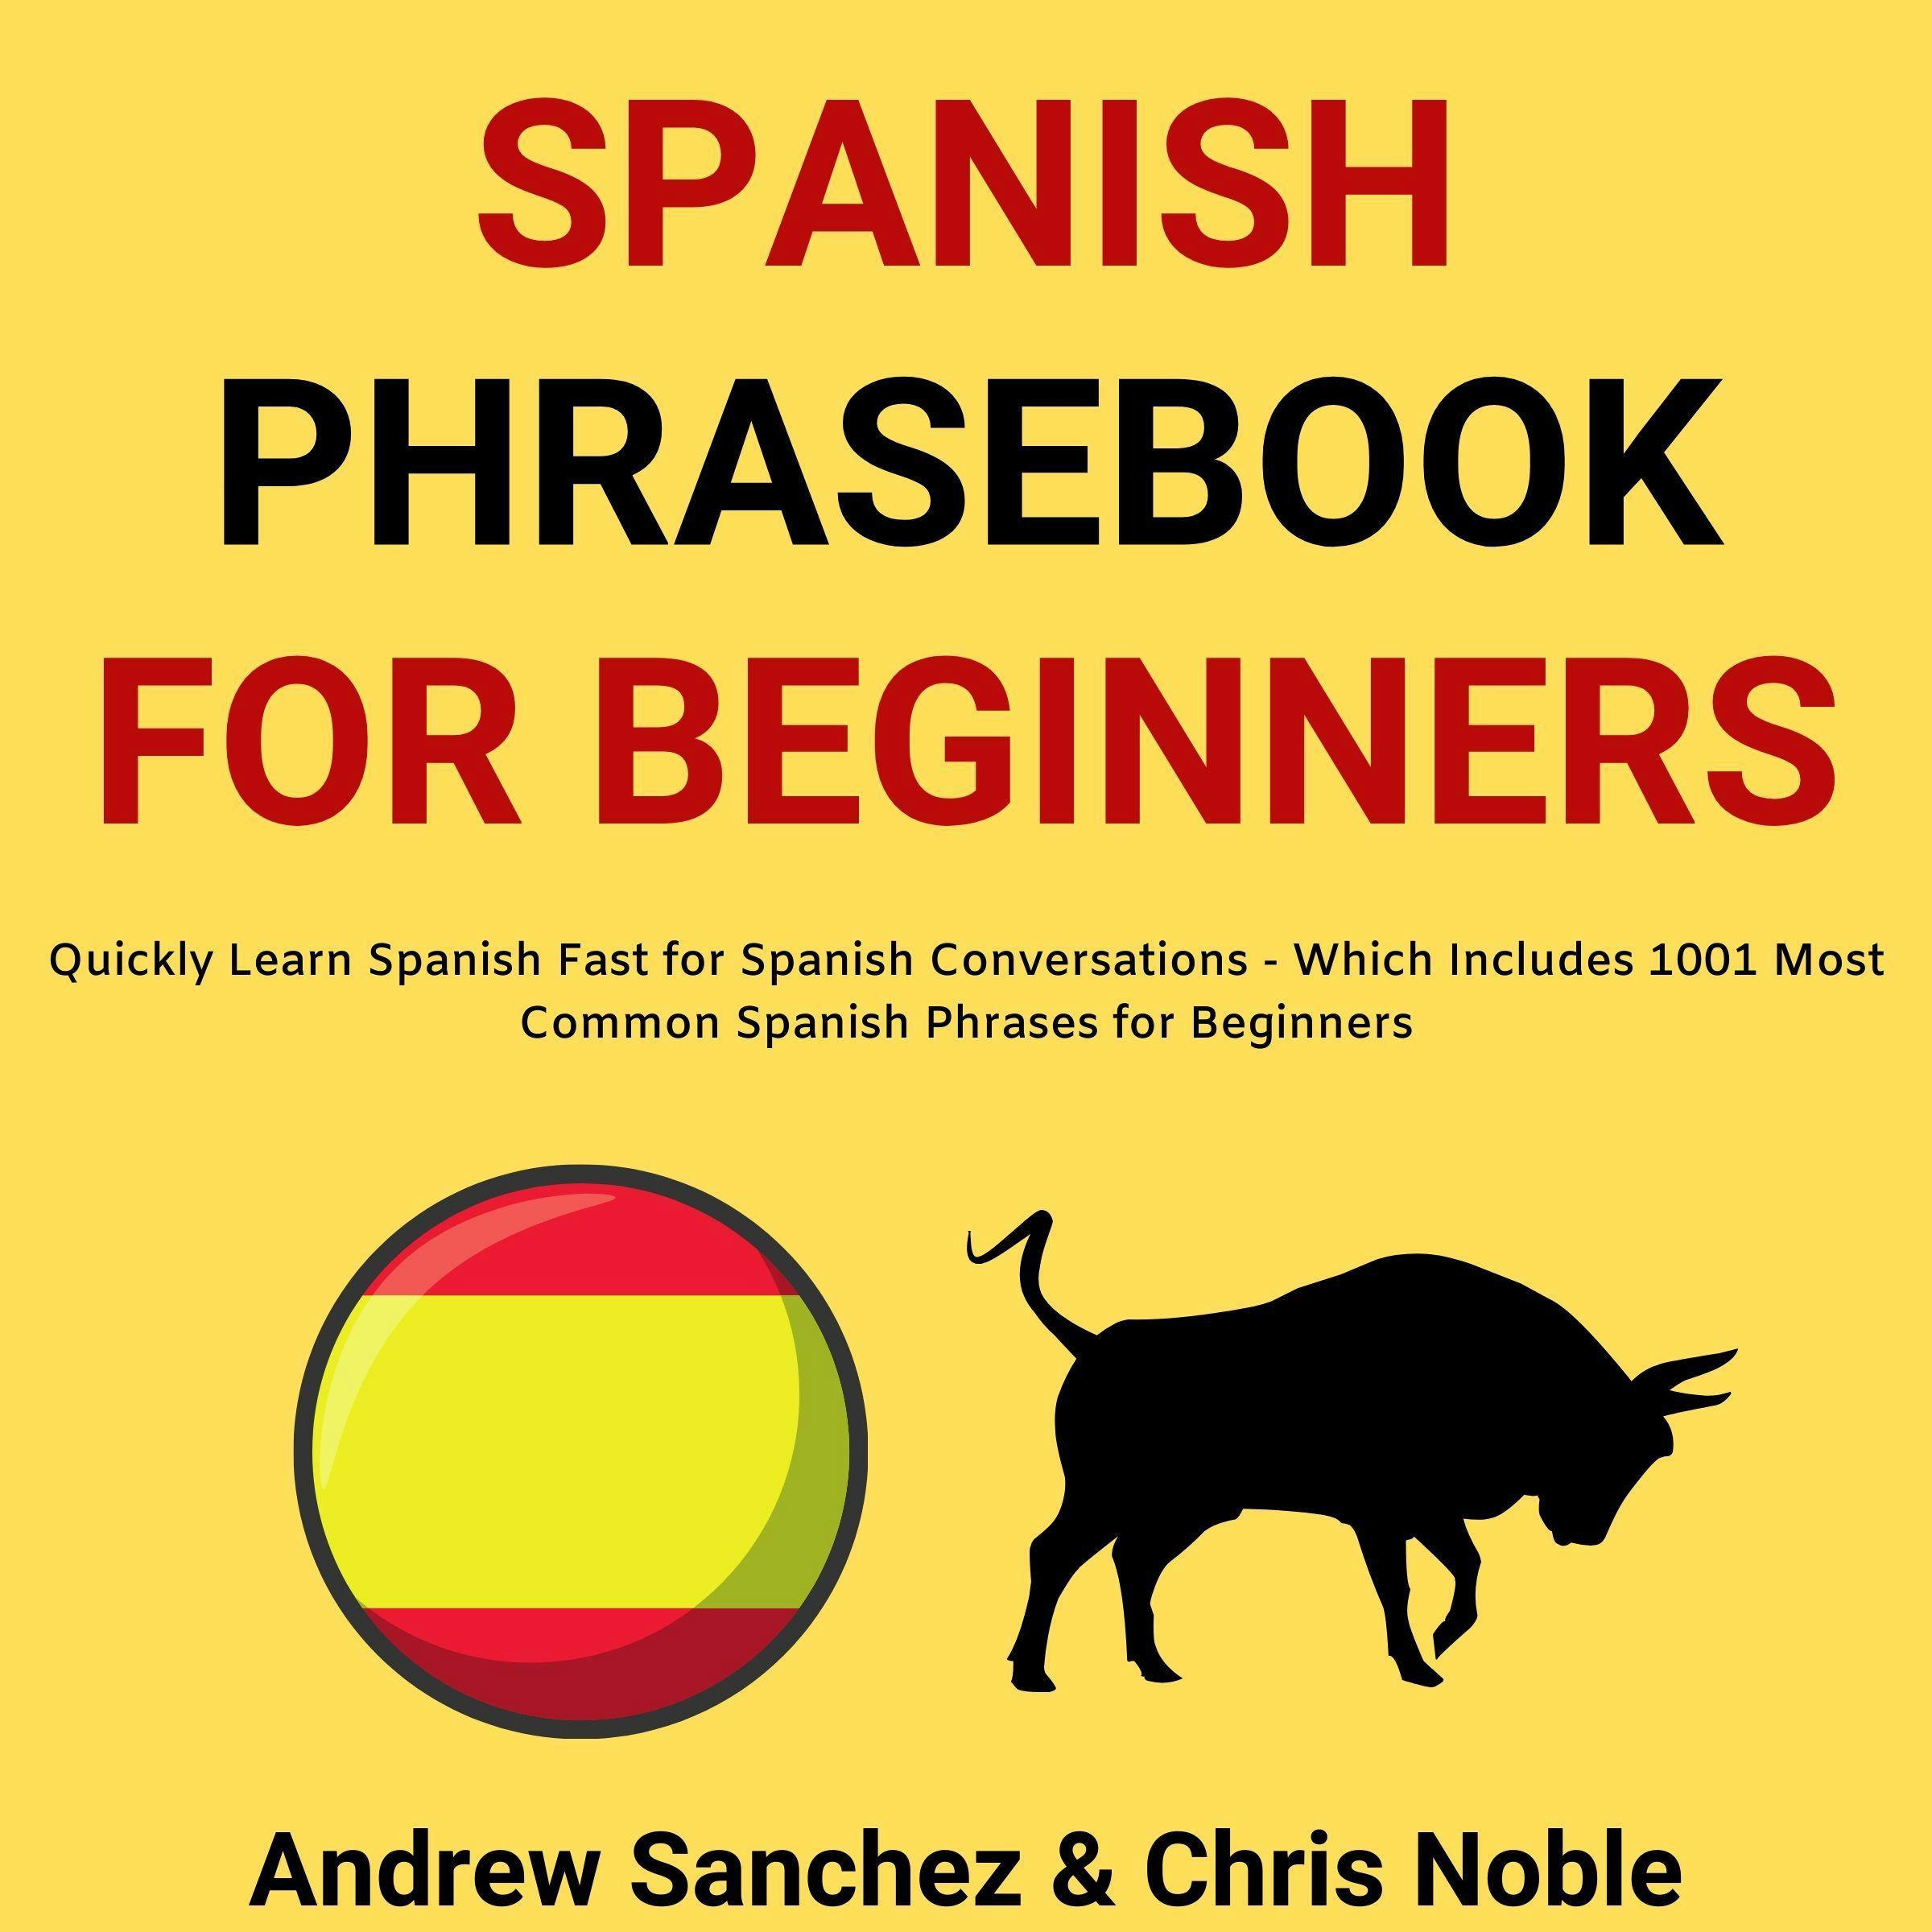 Spanish Phrasebook For Beginners: Quickly Learn Spanish Fast for Spanish Conversations - Which Includes 1001 Most Common Spanish Phrases for Beginners - Andrew Sanchez, Chris Noble